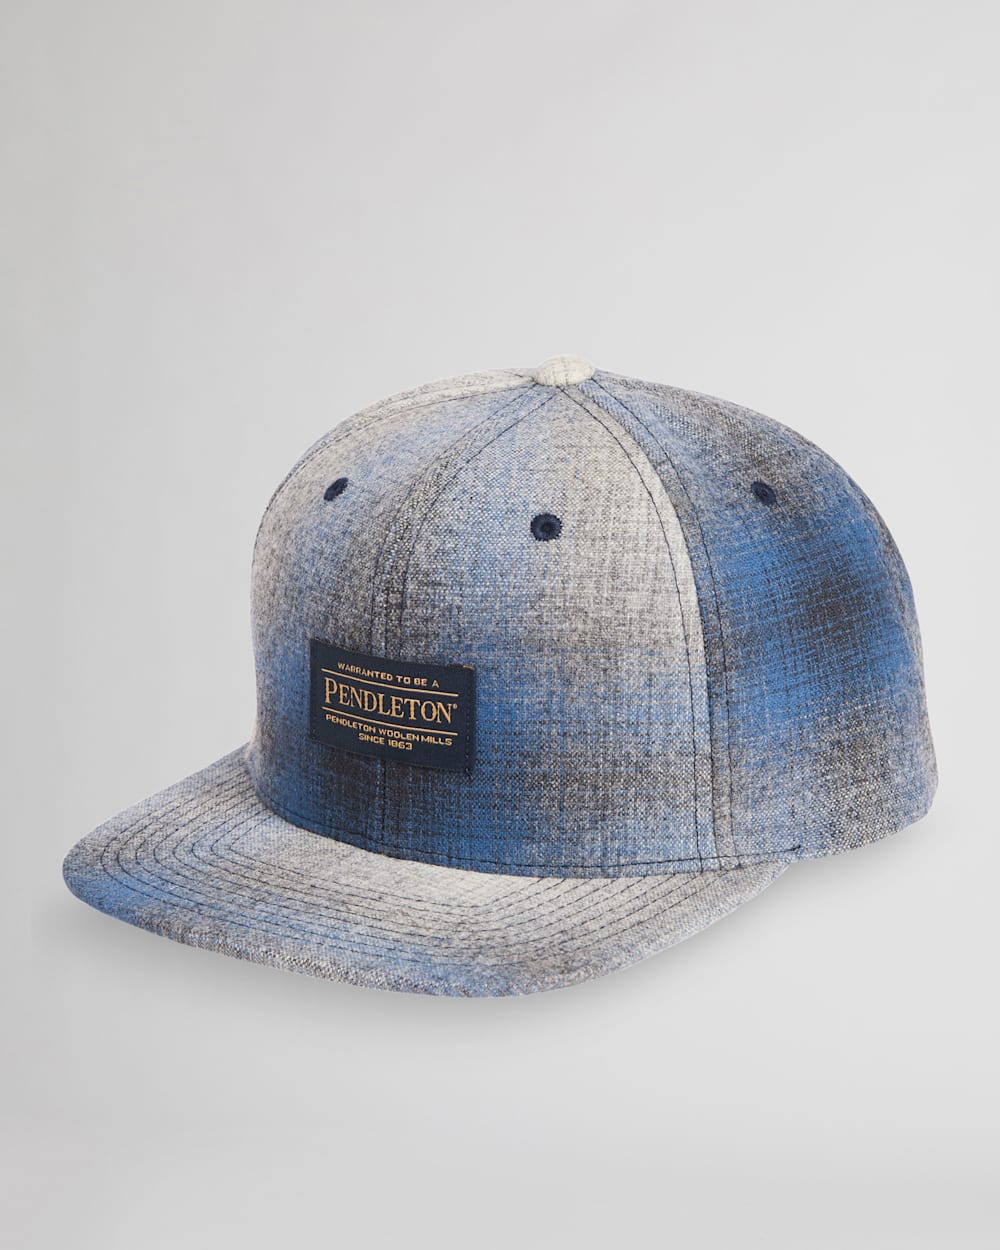 PLAID FLAT BRIM HAT IN BLUE/GREY MIX OMBRE image number 1